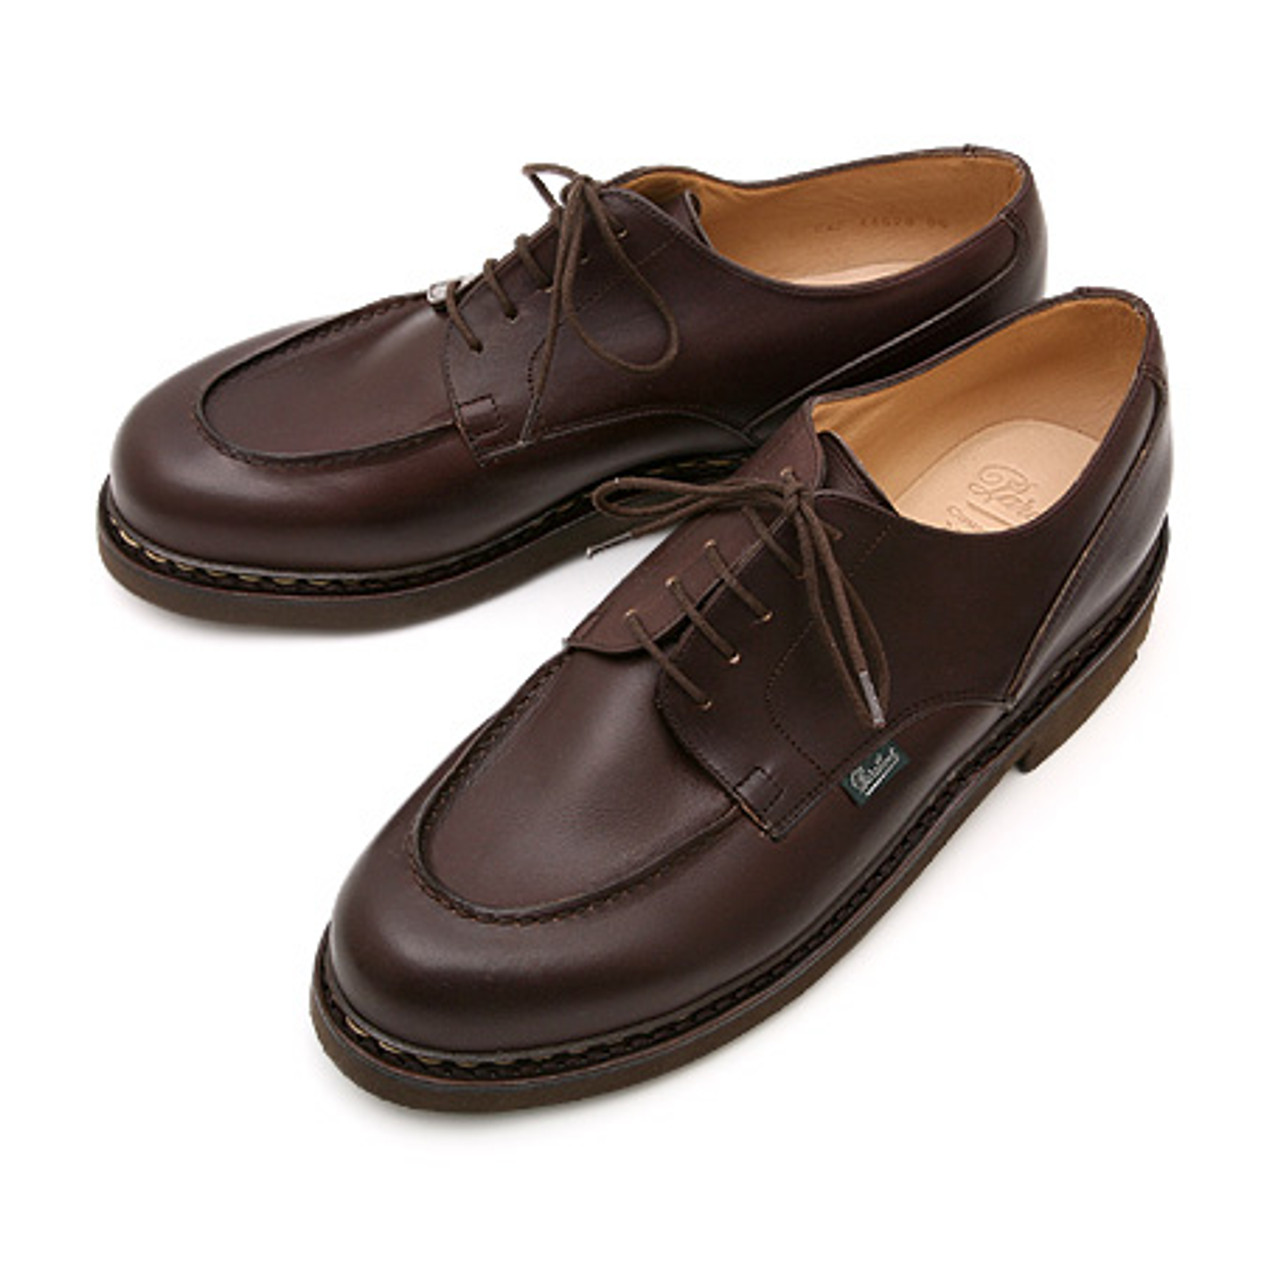 Paraboot Arles (703804) Wax Leather lace Up Brown